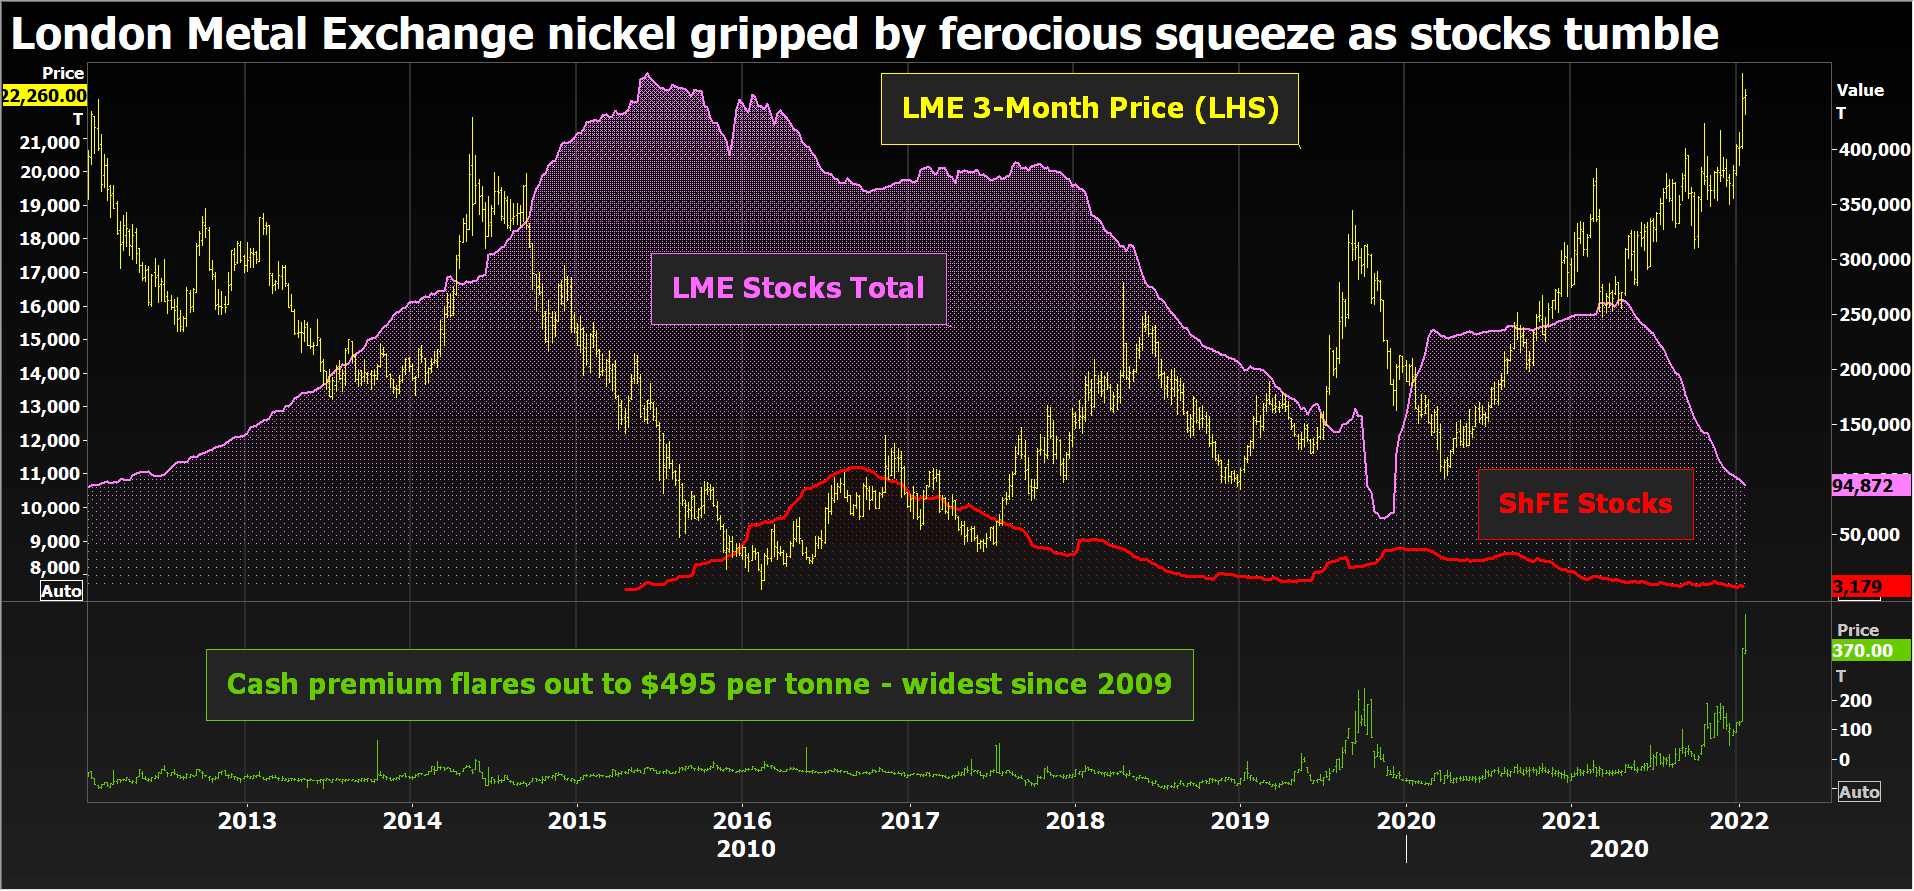 Nickel gripped by violent squeezing as stocks disappear